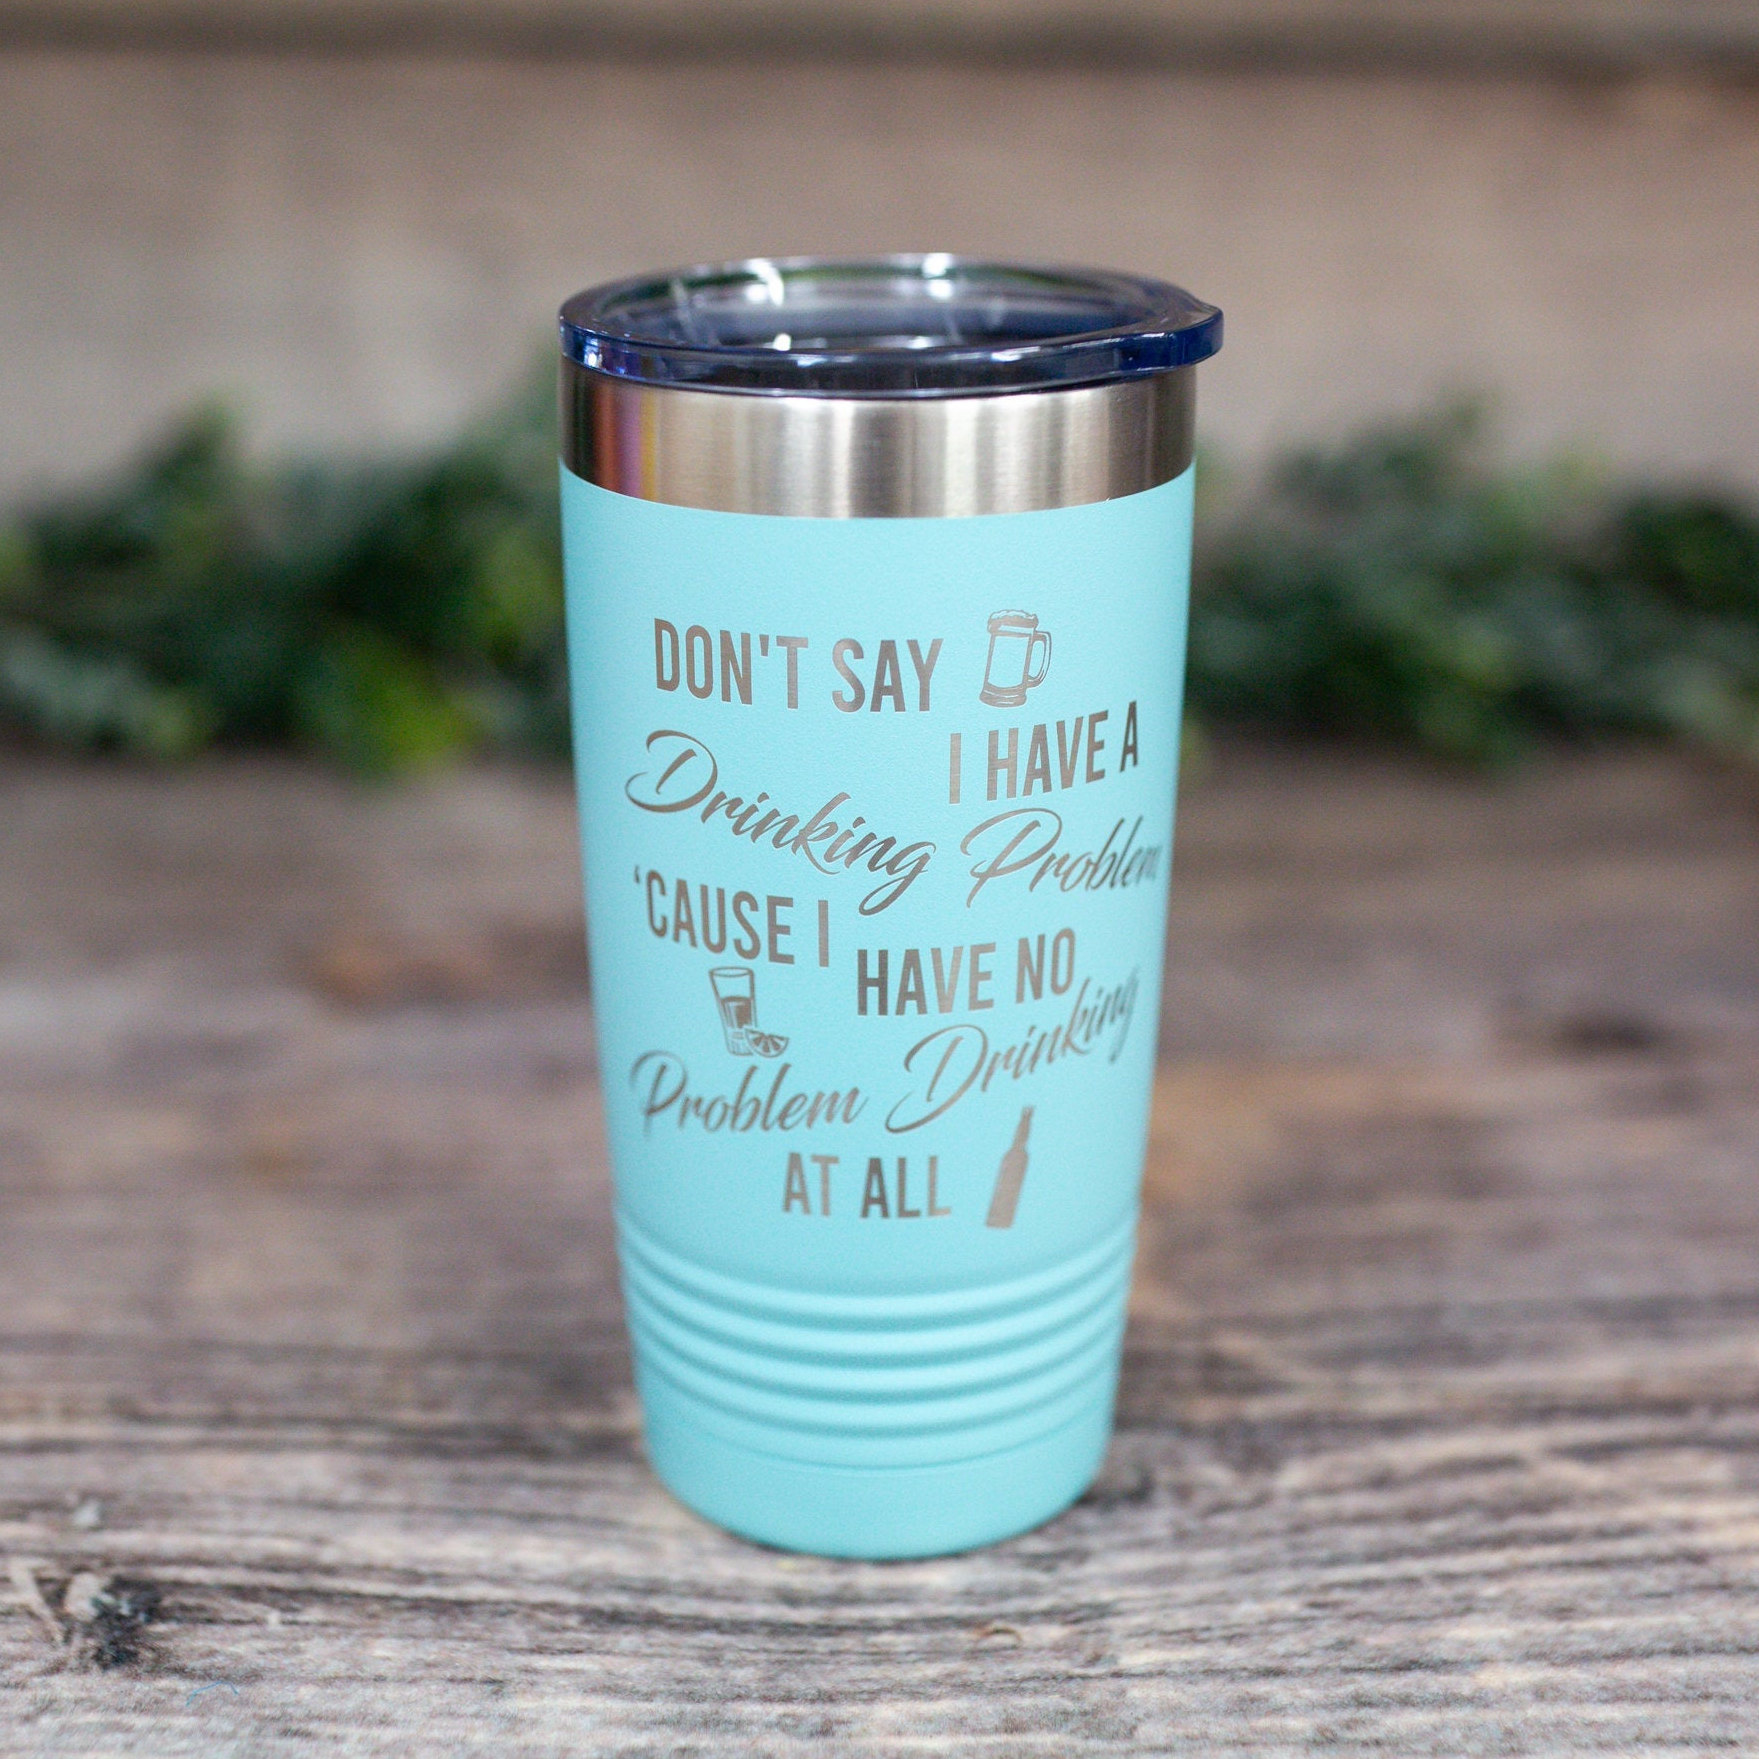 https://3cetching.com/wp-content/uploads/2021/07/dont-say-i-have-a-drinking-problem-engraved-stainless-steel-tumbler-alcohol-gift-funny-drinking-tumbler-60f73e04.jpg